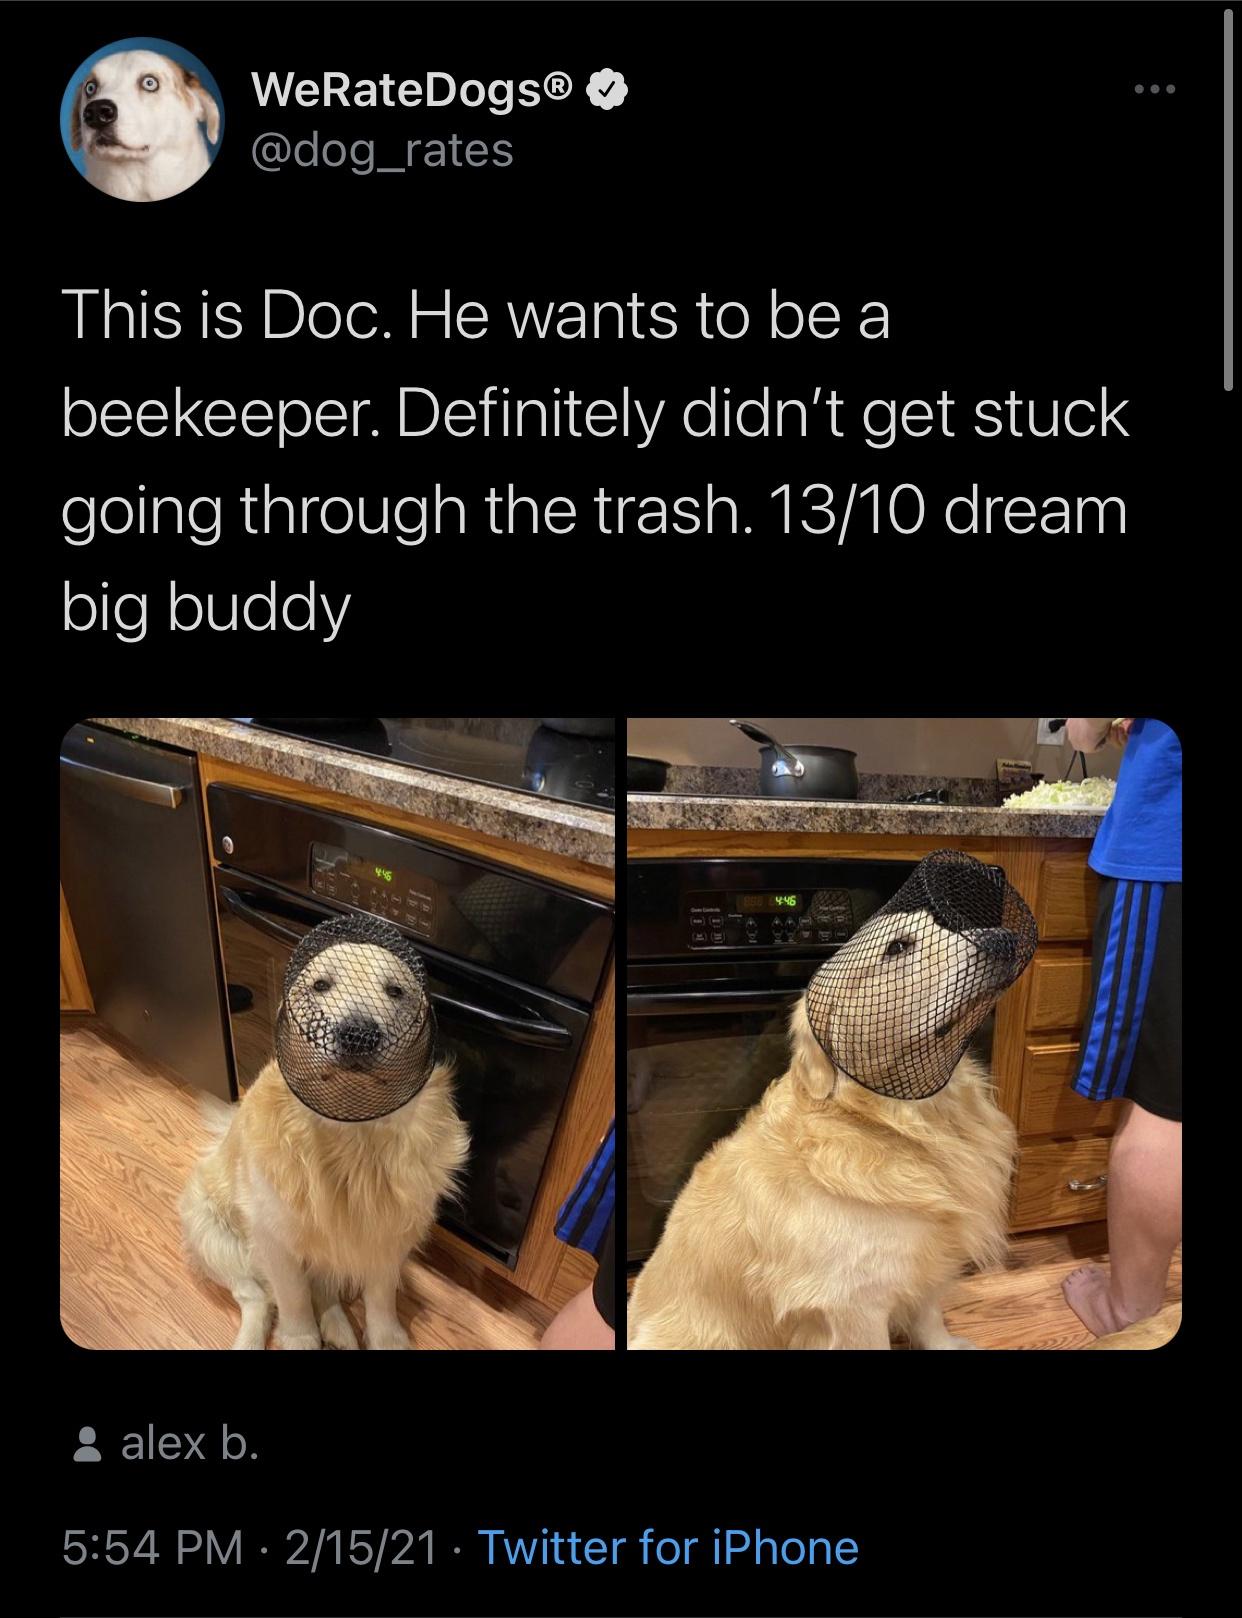 dog - WeRateDogs This is Doc. He wants to be a beekeeper. Definitely didn't get stuck going through the trash. 1310 dream big buddy 446 alex b. 21521 Twitter for iPhone